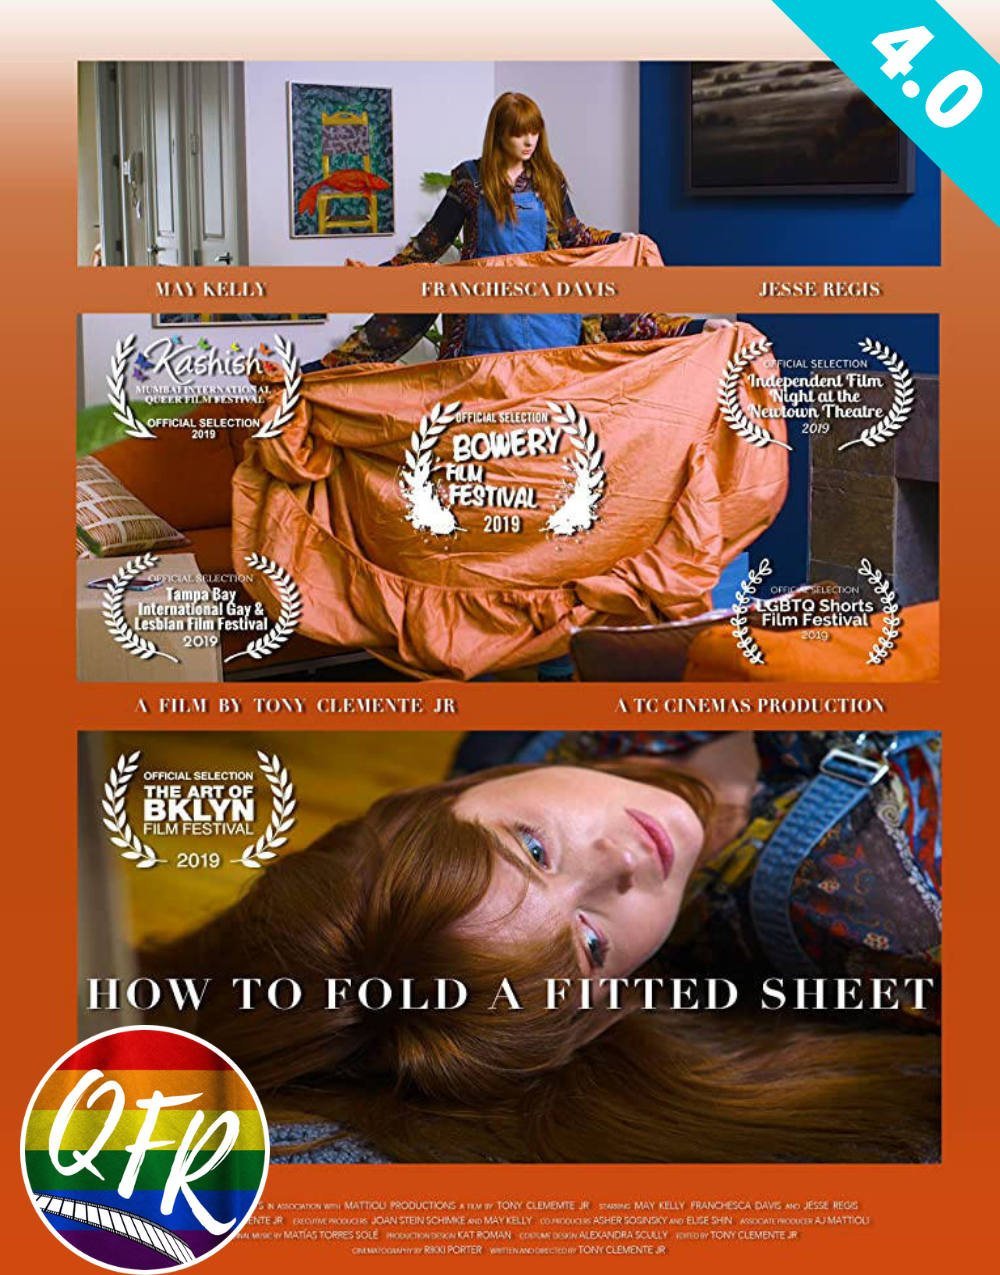 Film poster for "How To Fold A Fitted Sheet", with teal rating banner showing "4.0" in upper right corner